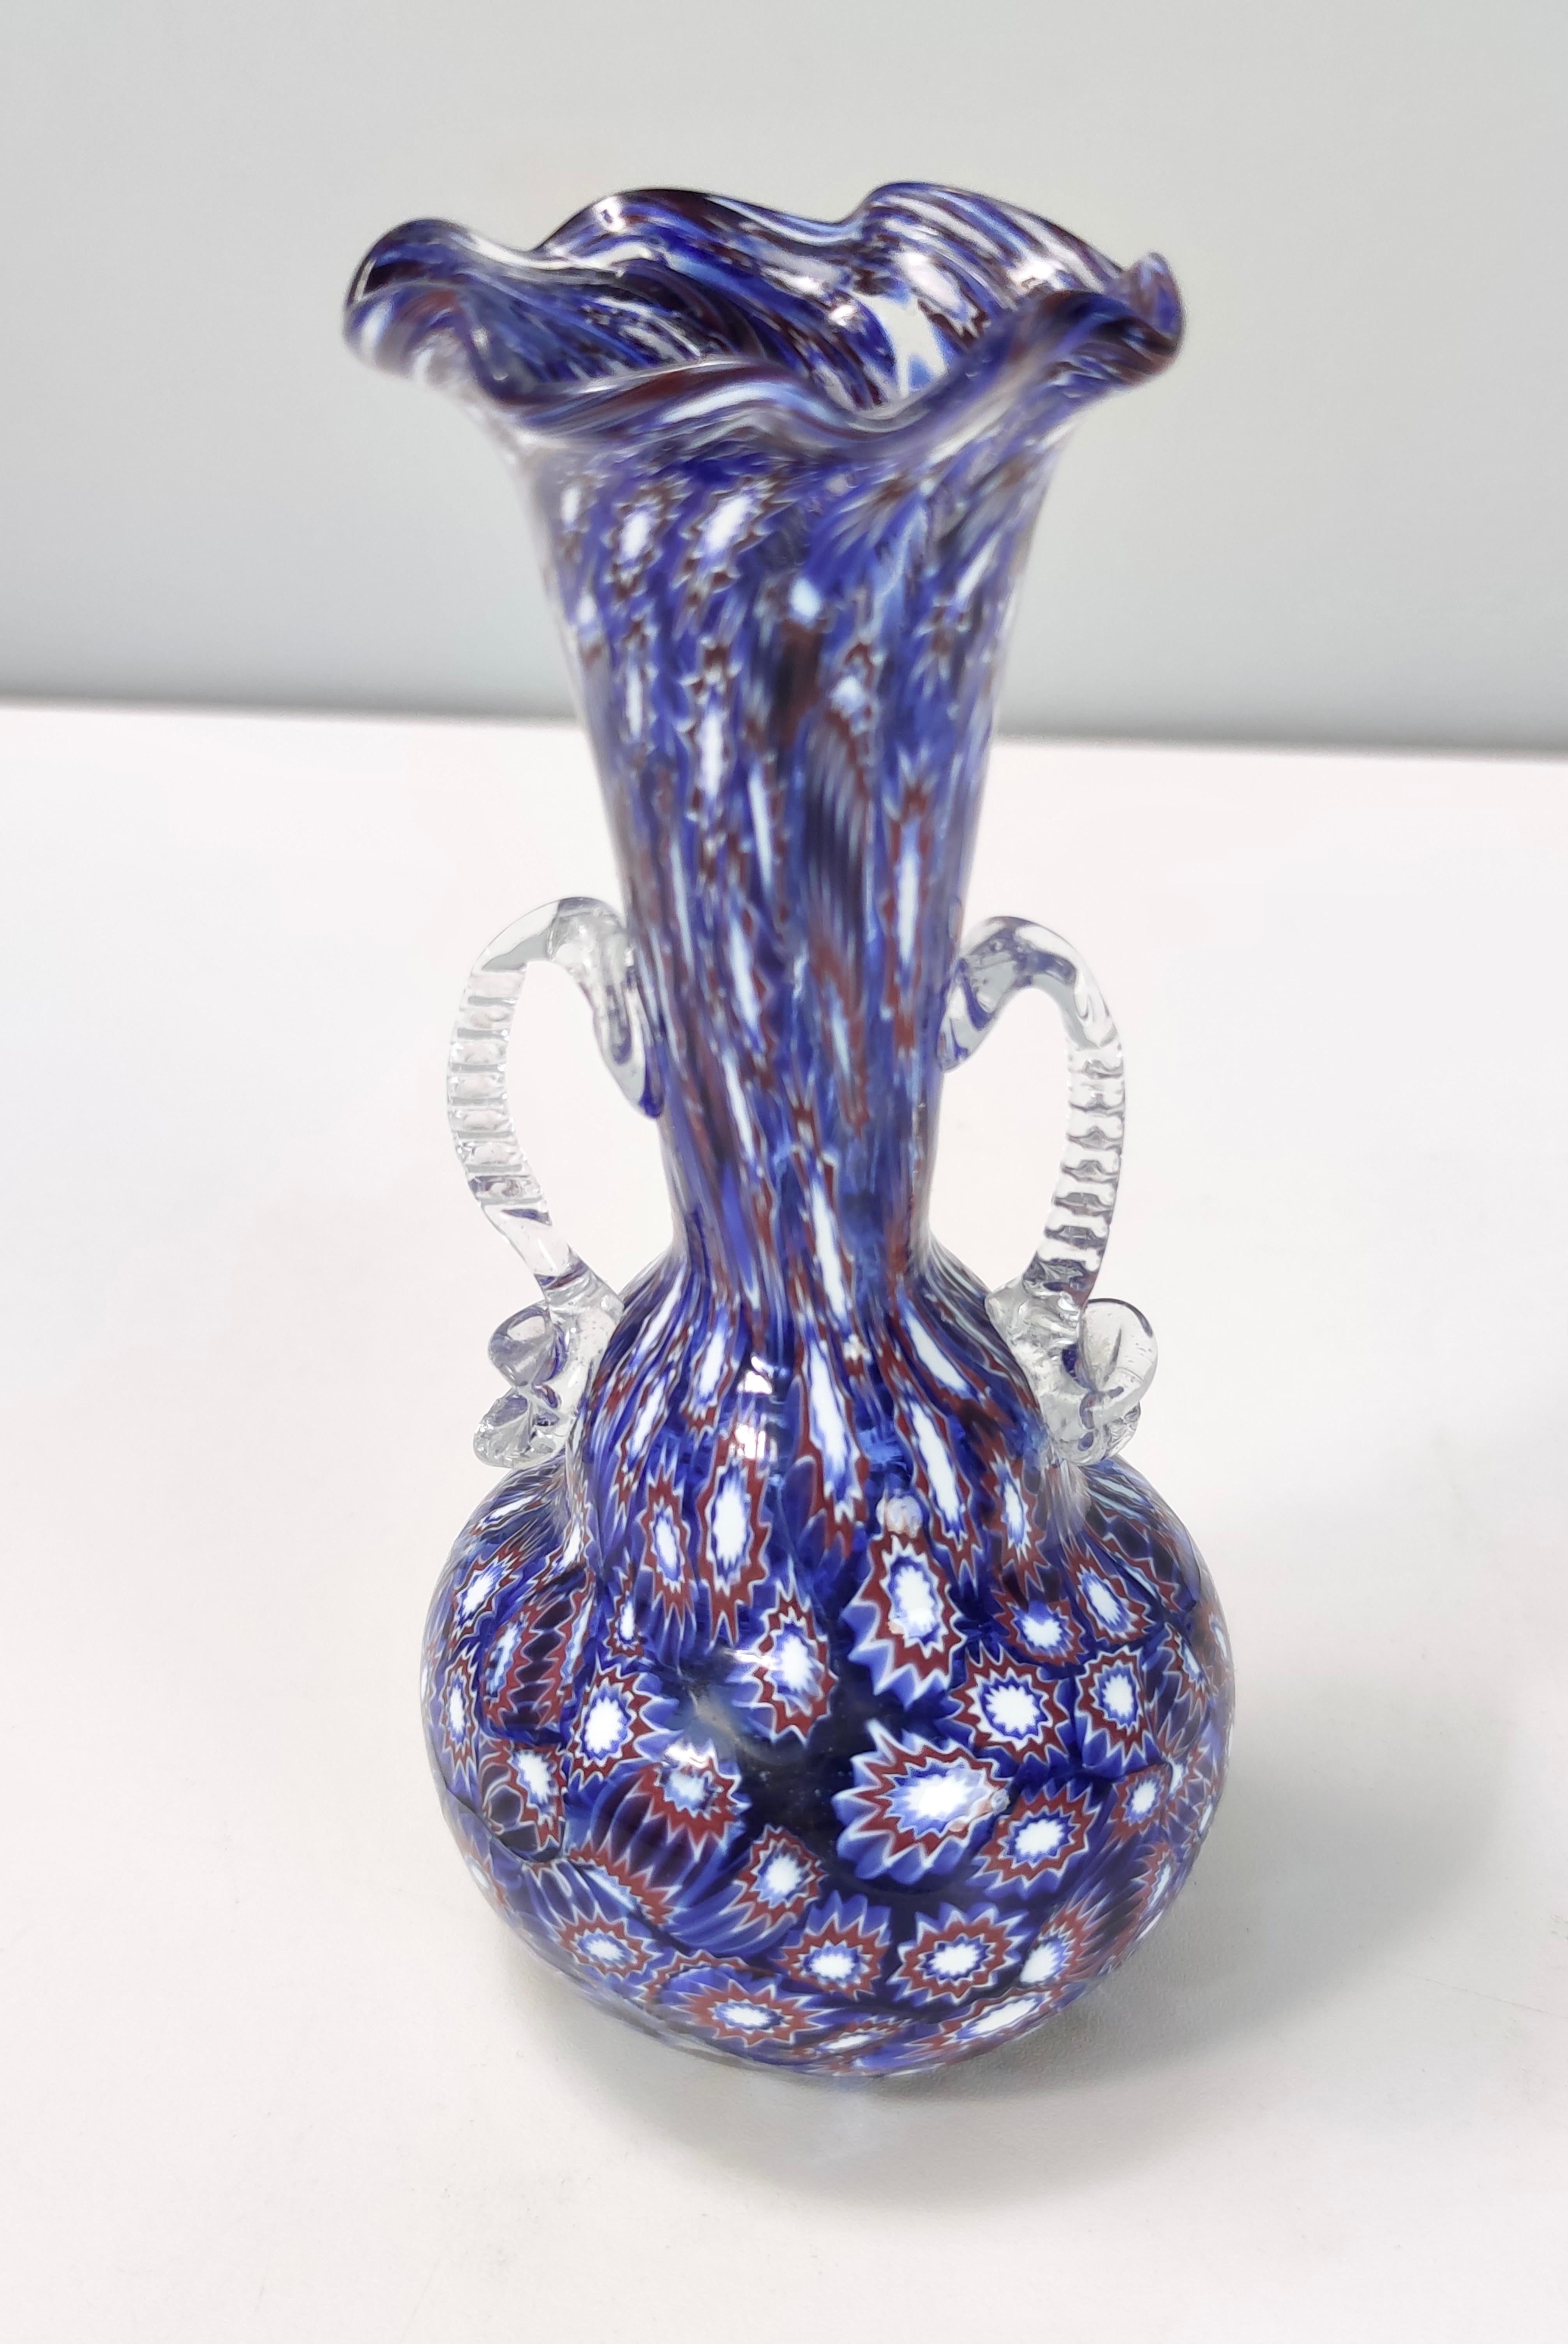 Vintage Blue Murano Glass Vase Ascribable to Fratelli Toso with Murrines, Italy For Sale 2